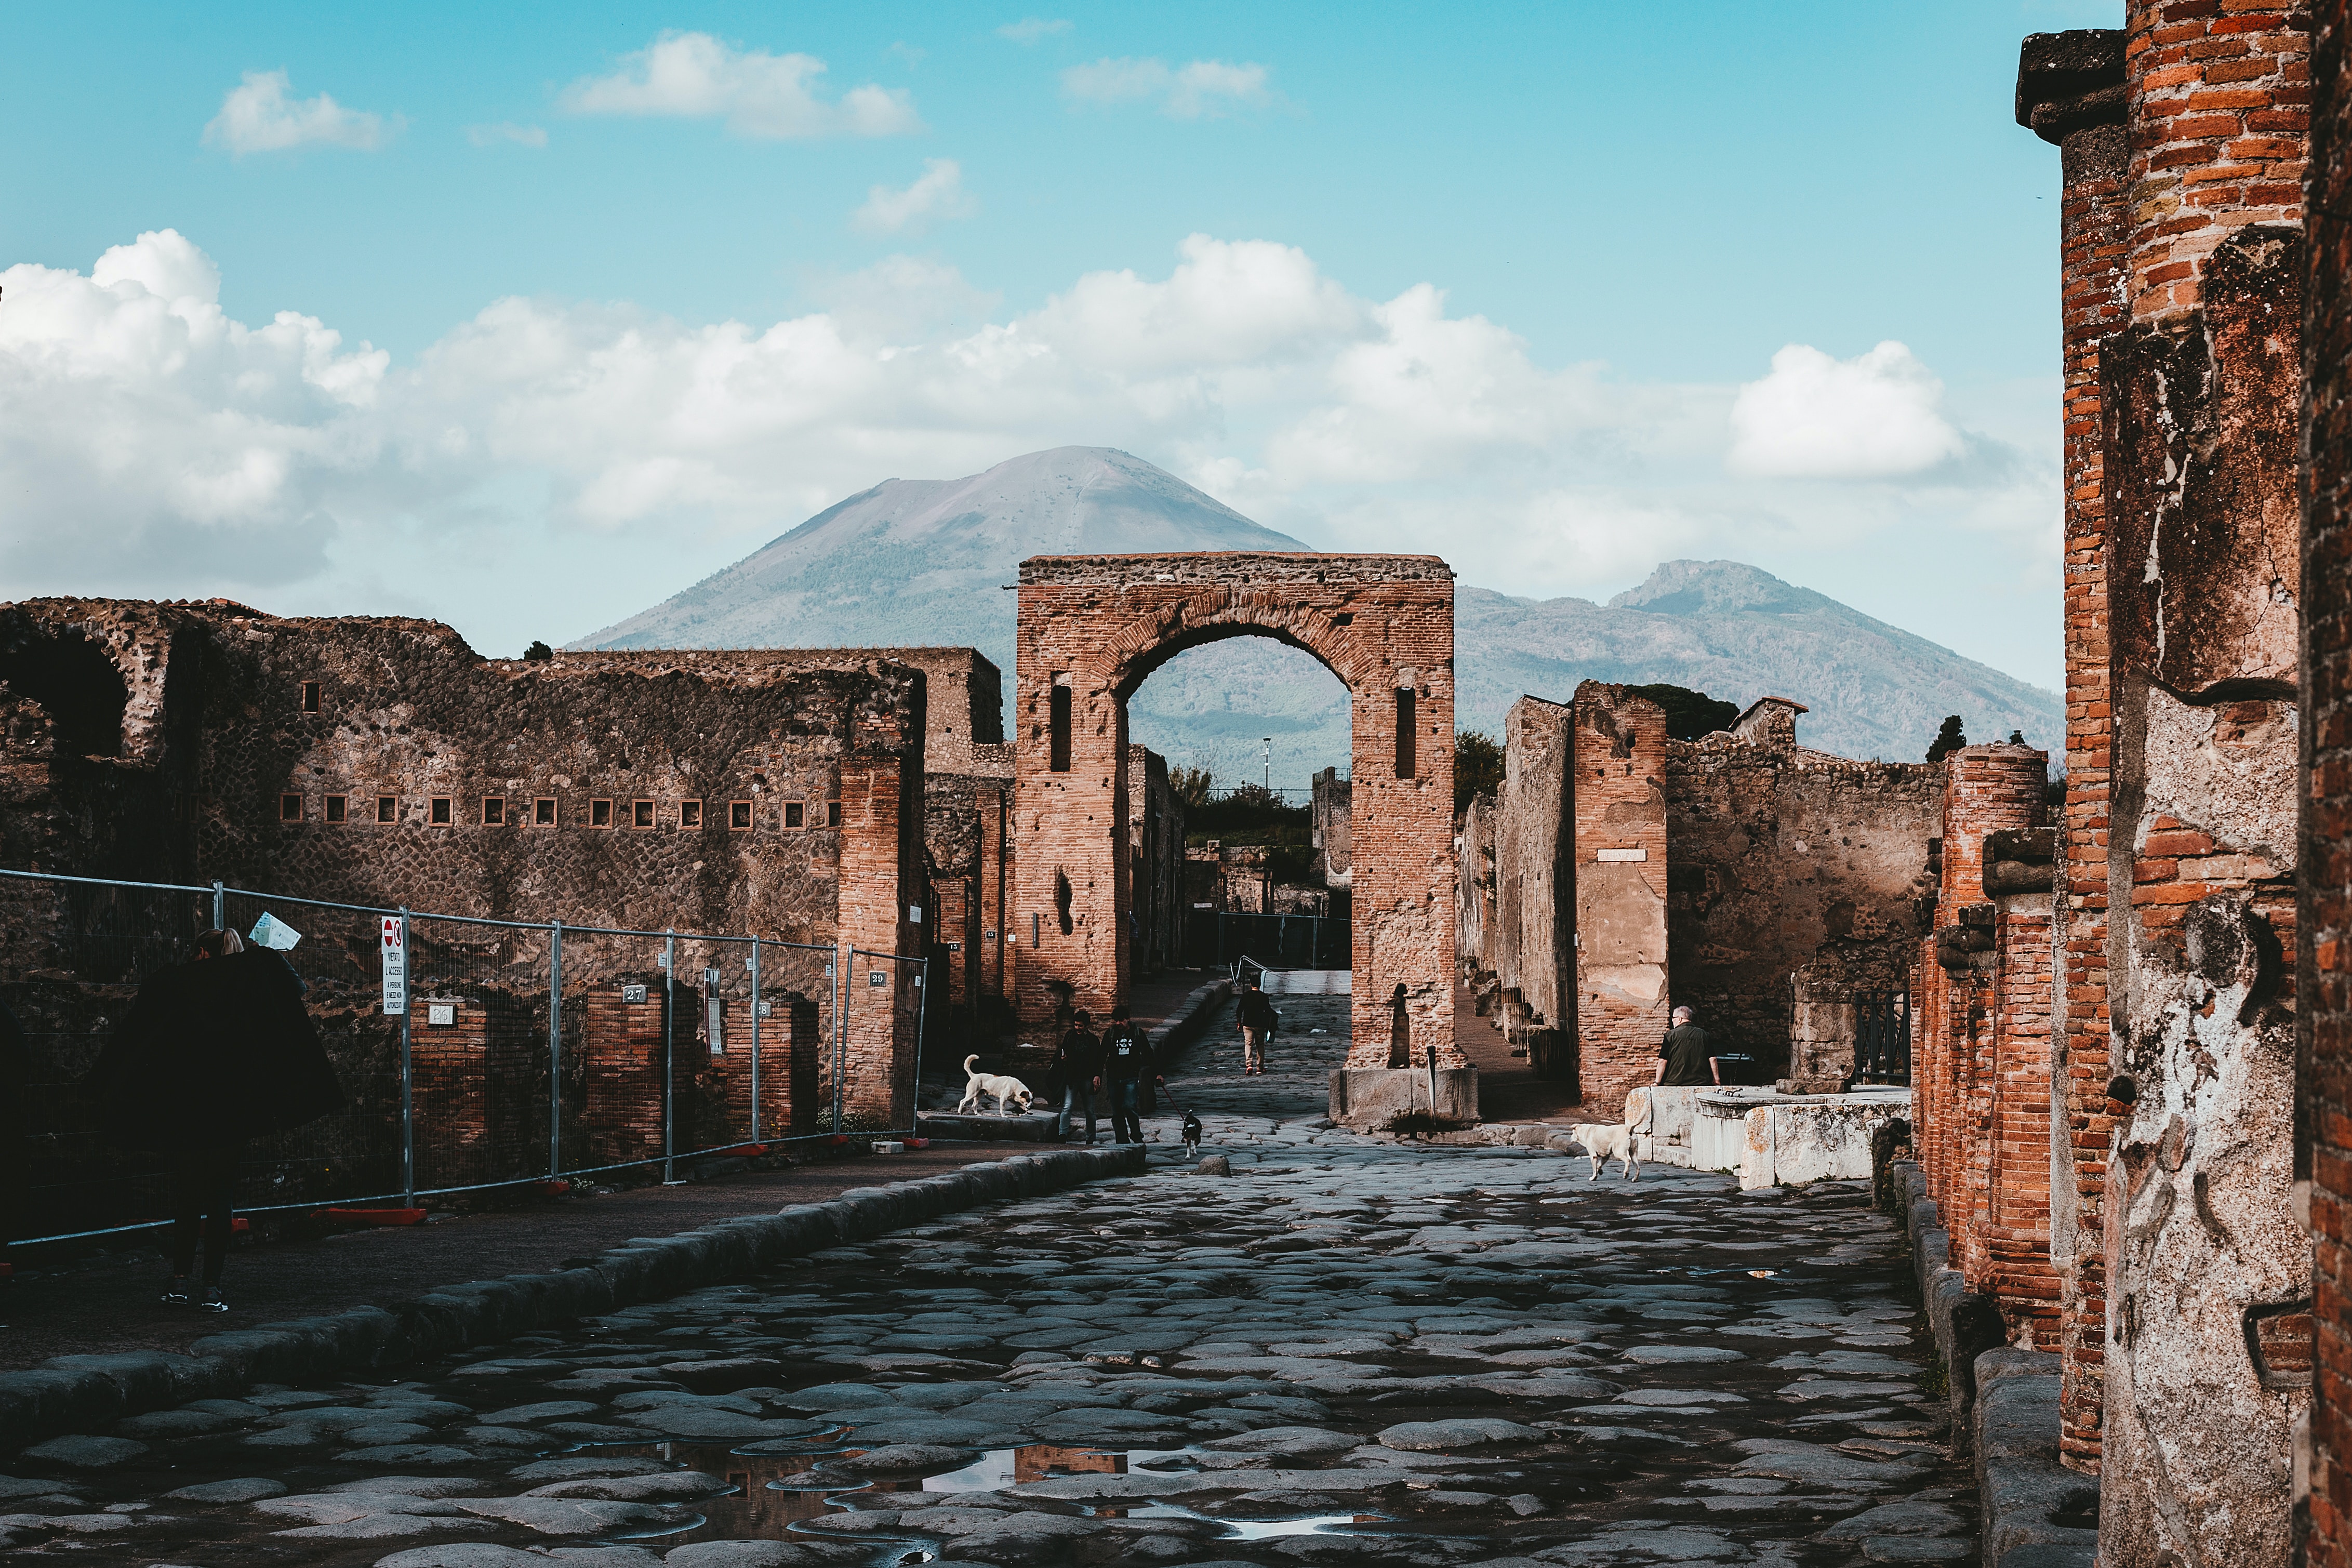 Cover Image for Tips for Visiting Pompeii: How to Beat the Crowds and Stay Comfortable